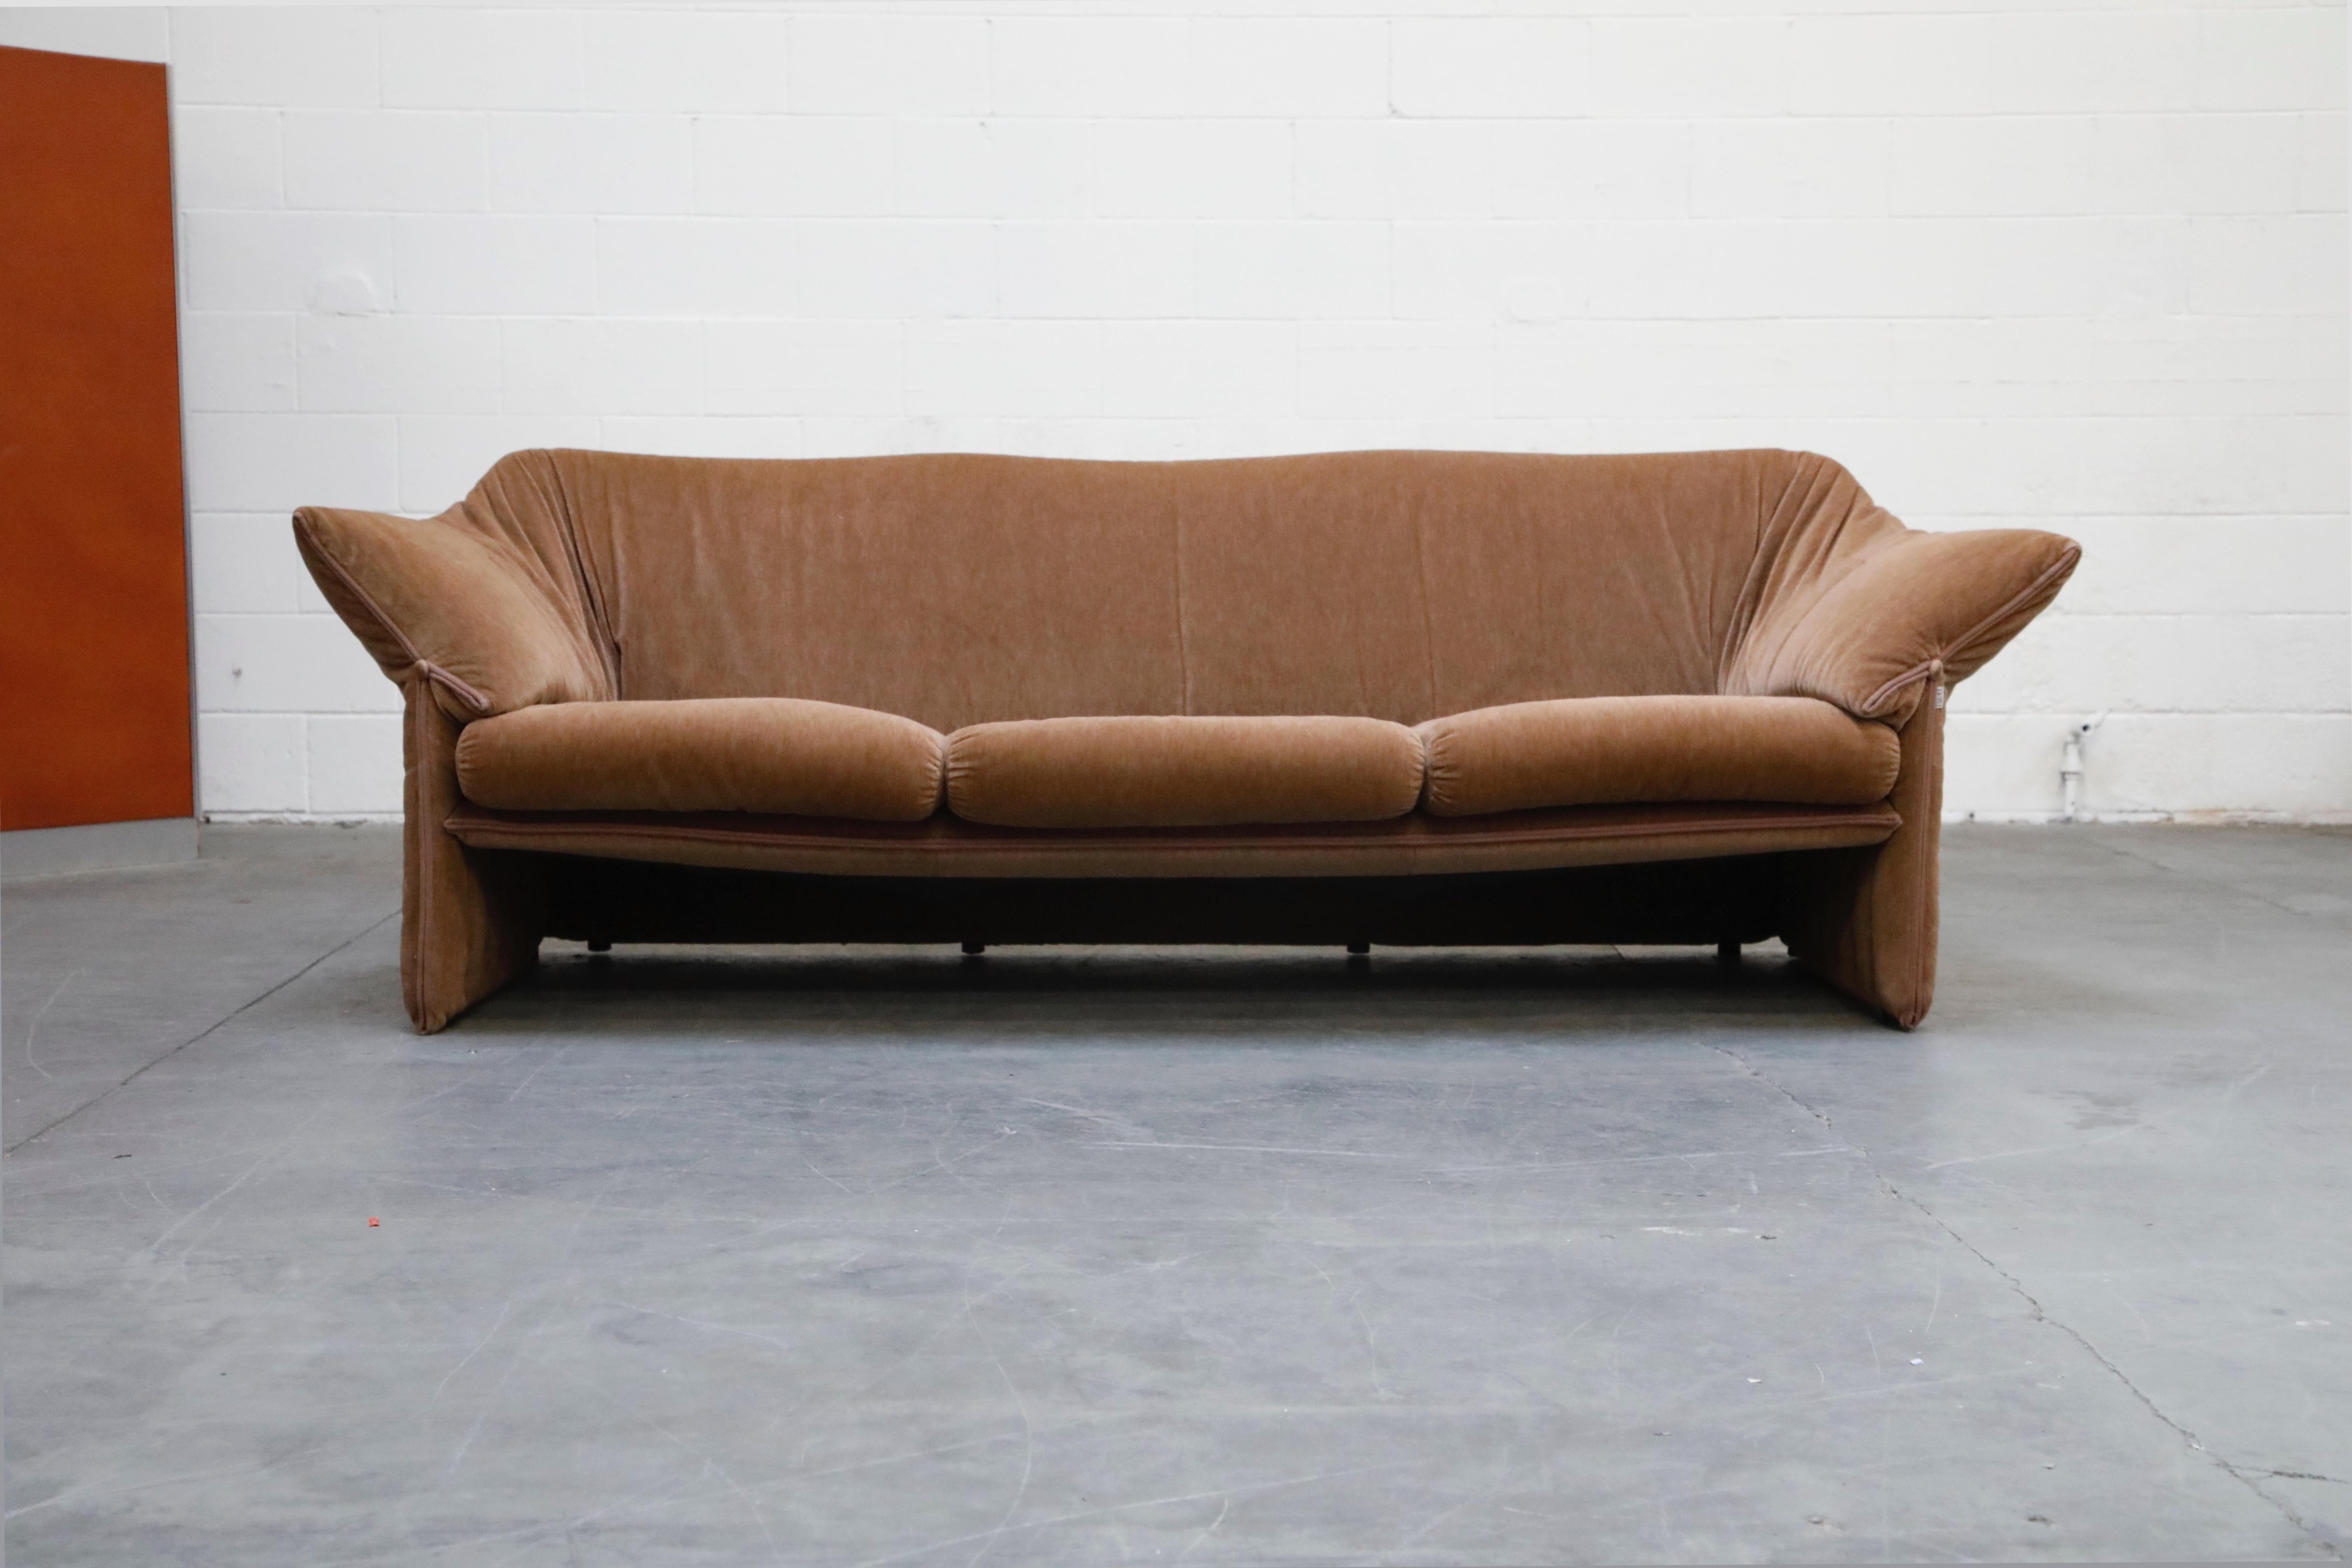 This fantastic three seat 'Le Stelle' sofa by Mario Bellini for B&B Italia was designed in 1974, this early production (original) example is from mid to late 1970s, with soft, cozy and comfortable brown fabric. Excellent collectors example, original